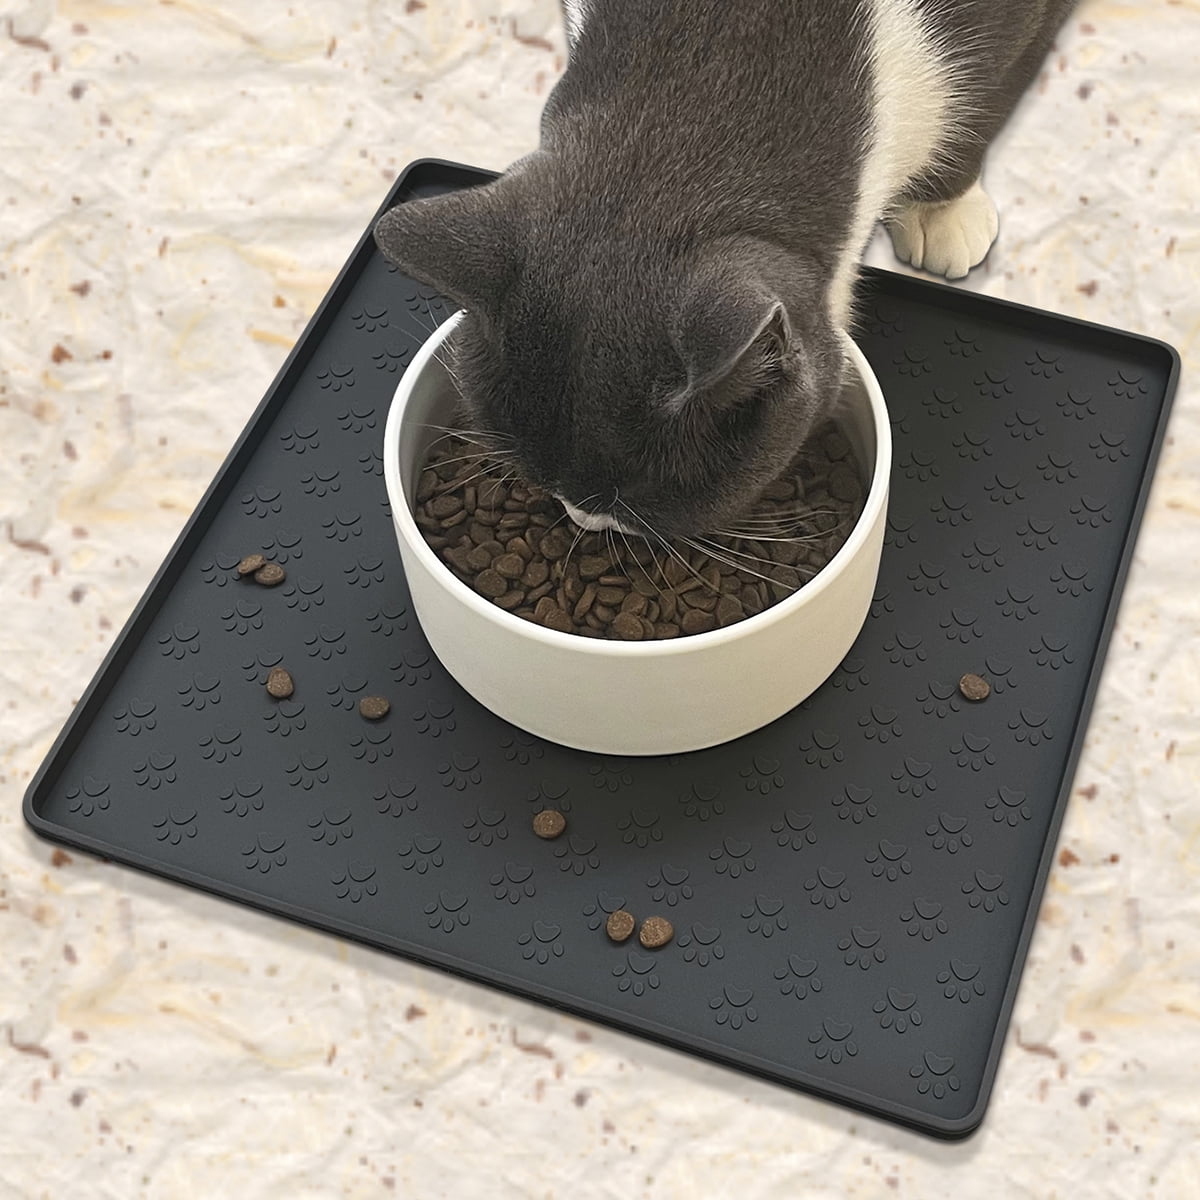 Diatom Mud Waterproof Pets Mat For Cats Dogs Food Pad Pets Bowl Drinking Mat  Pet Dogs Kittens Outdoor Home Feeding Placemat - AliExpress